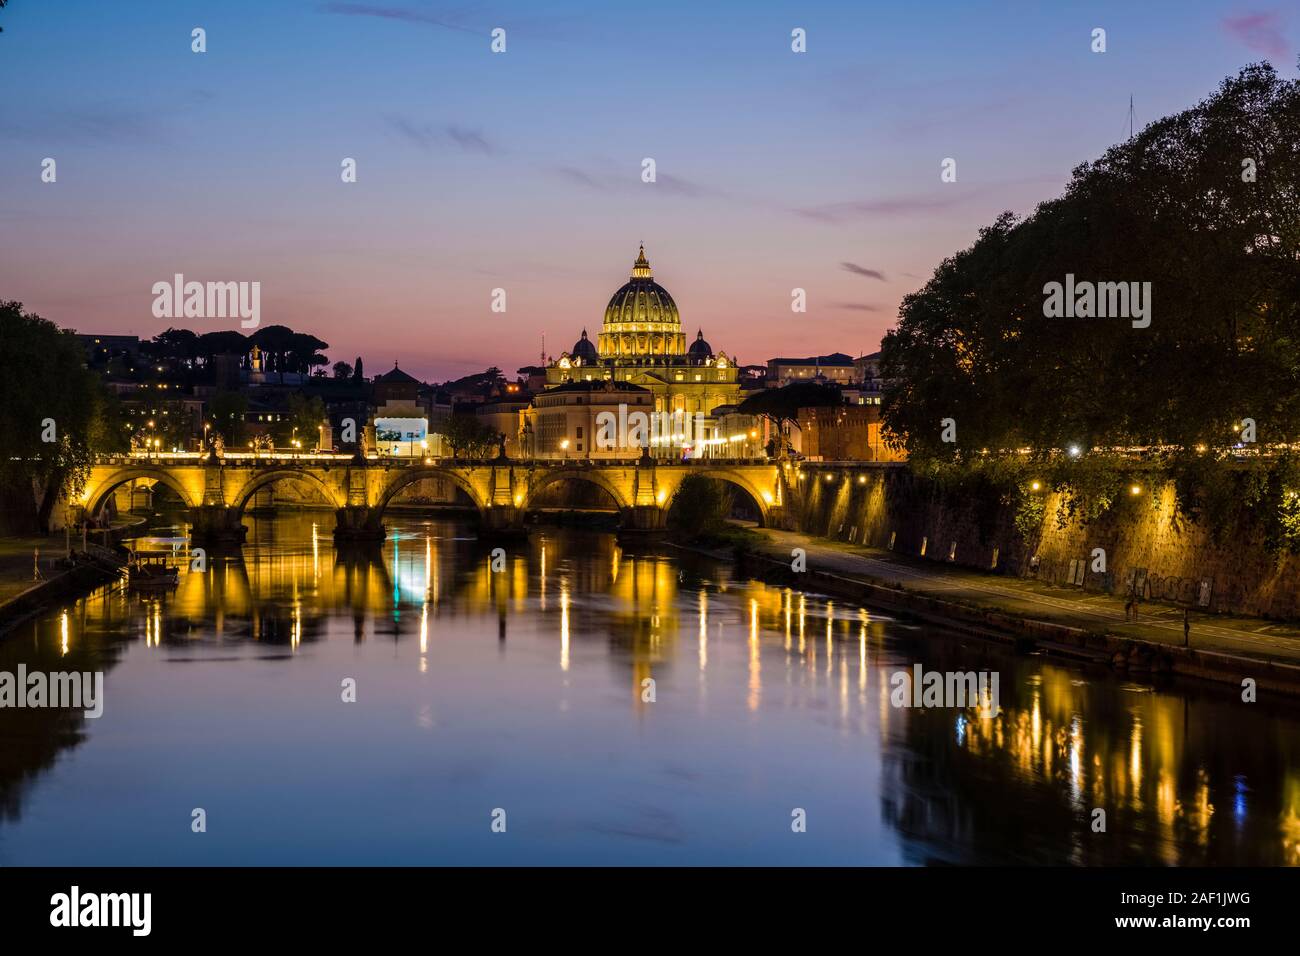 The Papal Basilica of St. Peter, St. Peter's Basilica and the bridge Ponte Sant'Angelo, illuminated at night, mirroring in the river Tiber Stock Photo